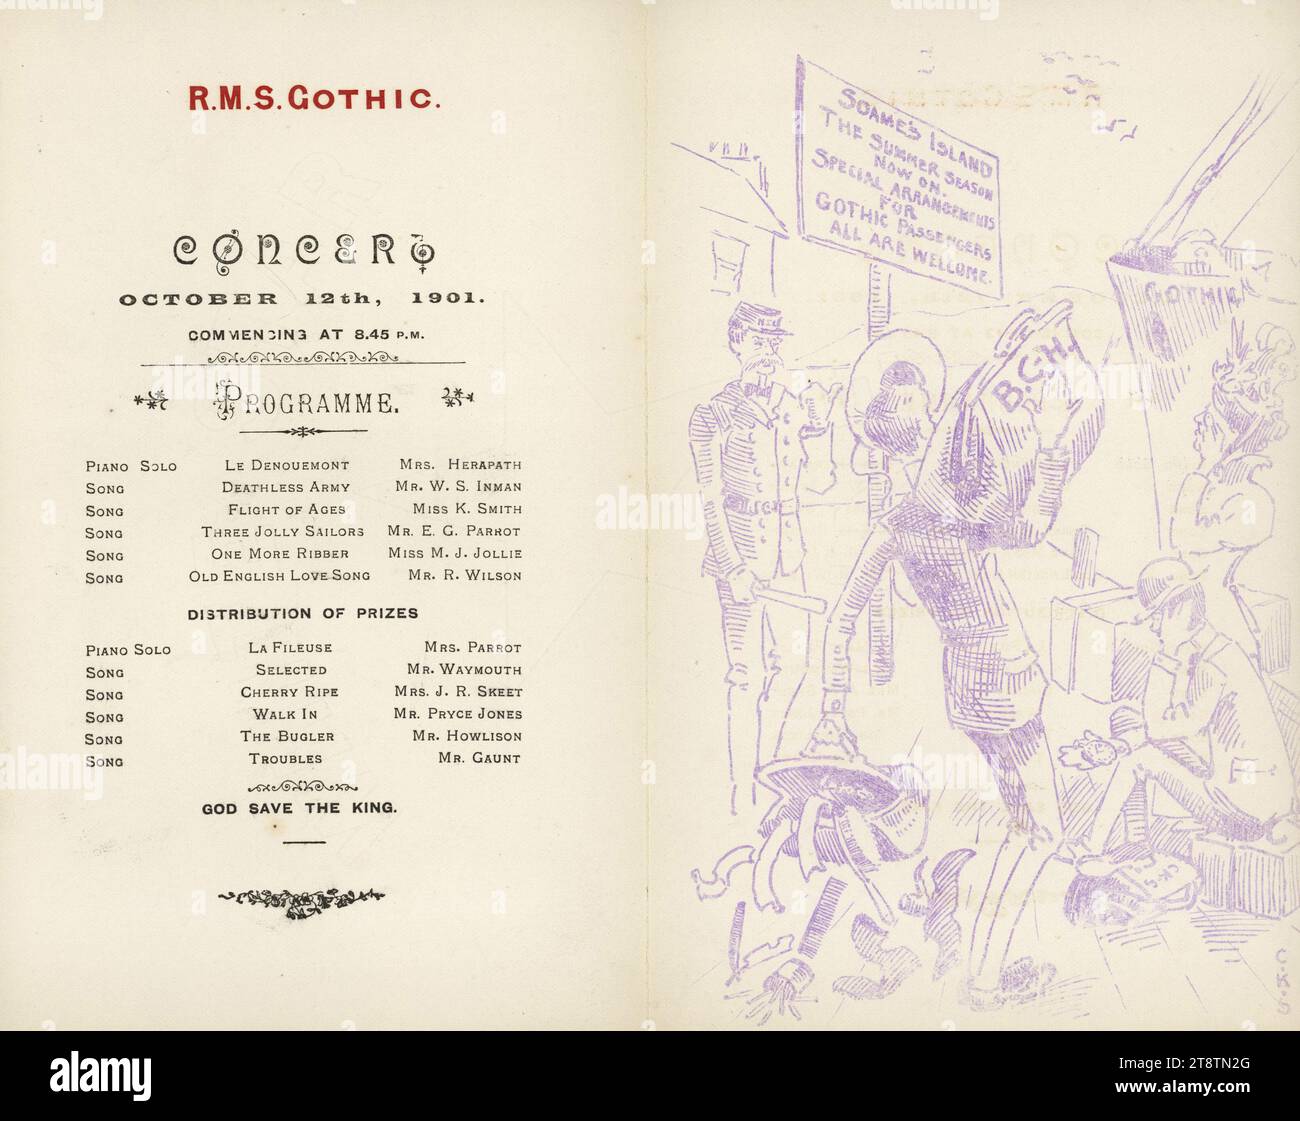 New Zealand Shipping Company Limited: R.M.S. Gothic. Concert October 12th, 1901. Programme and Soames Island / C.K.S cartoon, The left side shows a programme of songs and piano solos, performed on the 'Gothic' by Mrs Herapath, Mr W S Inman, Miss K Smith, Mr E G Parrot, Miss M J Jollie, Mr R Wilson, Mrs Parrot, Mr Waymouth, Mrs J R Skeet, Mr Pryce Jones, Mr Howlison, Mr Gaunt. Apart from Mr Inman (ship's purser) and Mr Waymouth these were all saloon passengers on board the 'Gothic', leaving London on 30 August 1901 Stock Photo